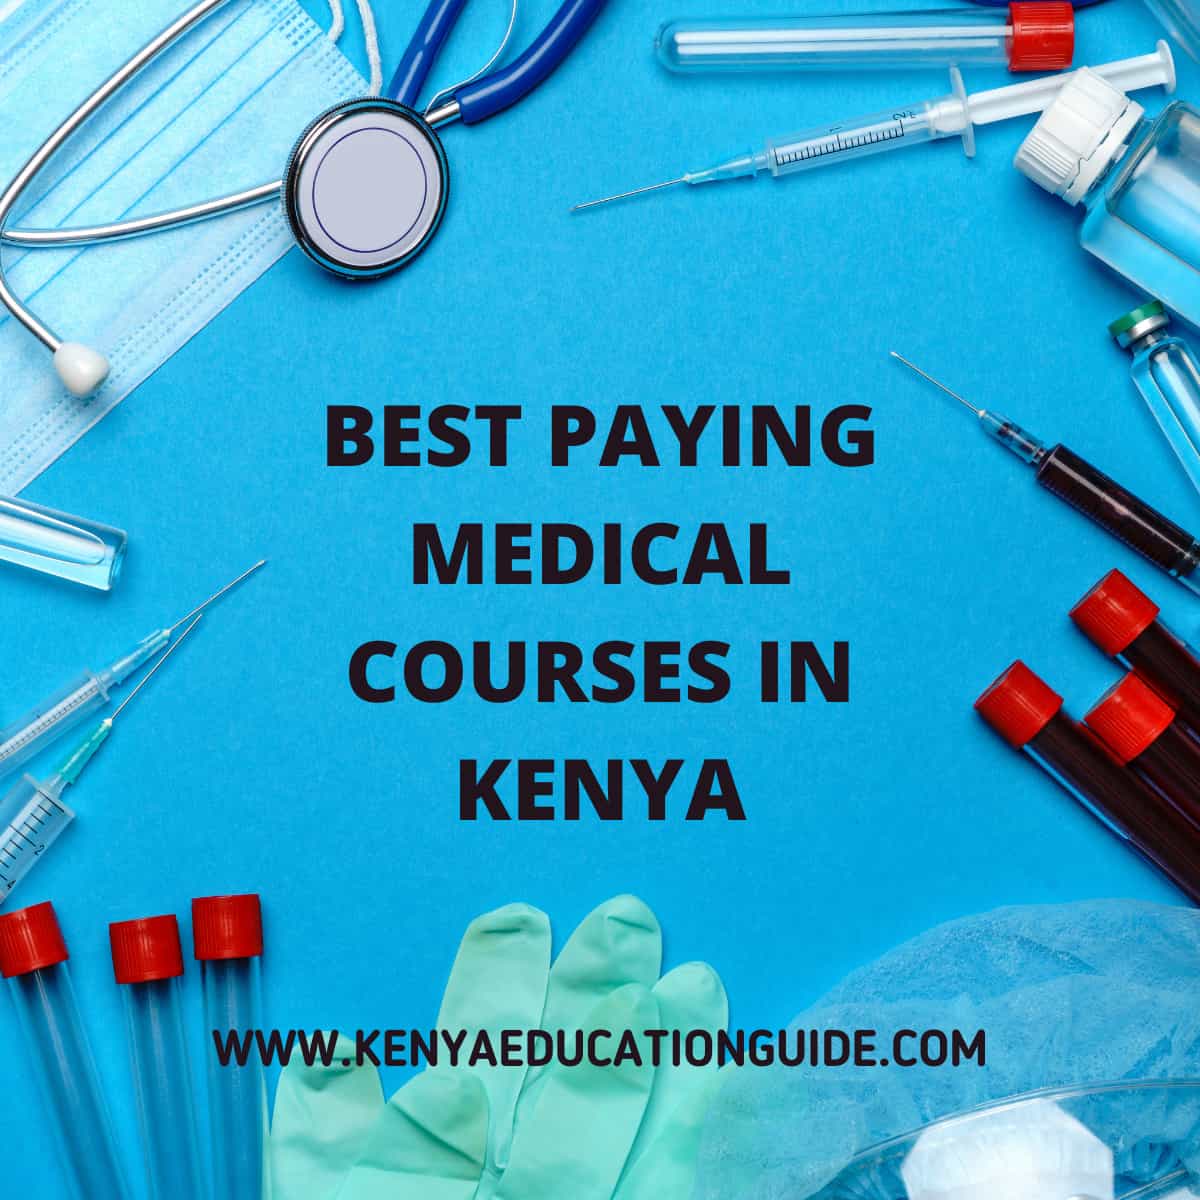 Best Paying Medical Courses in Kenya